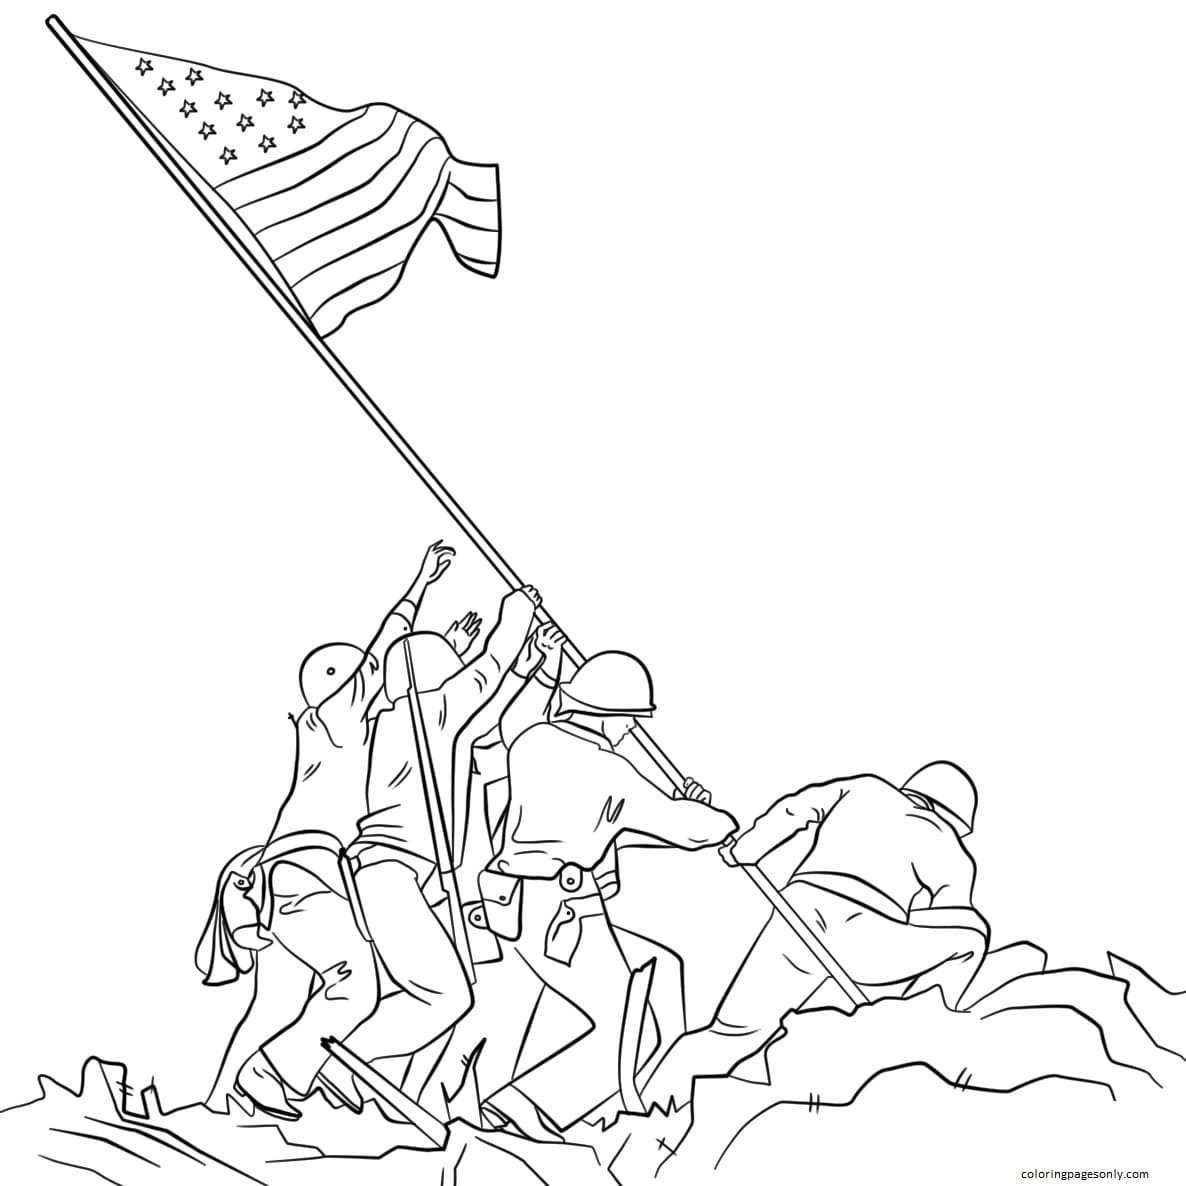 Raising The Flag on iwo jima Coloring Pages